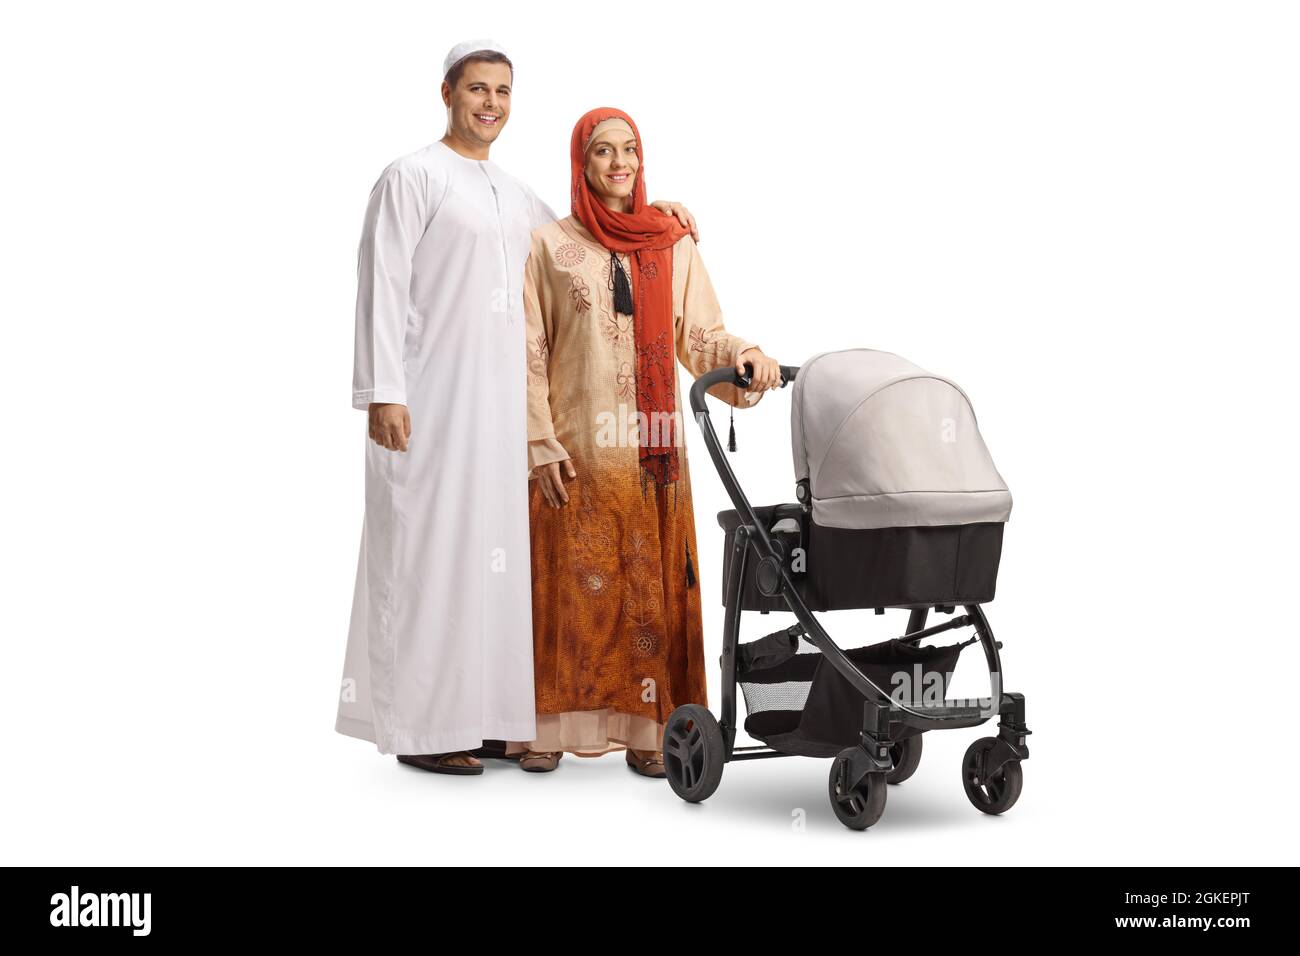 Young man and woman in ethnic clothes standing with a baby stroller isolated on white background Stock Photo